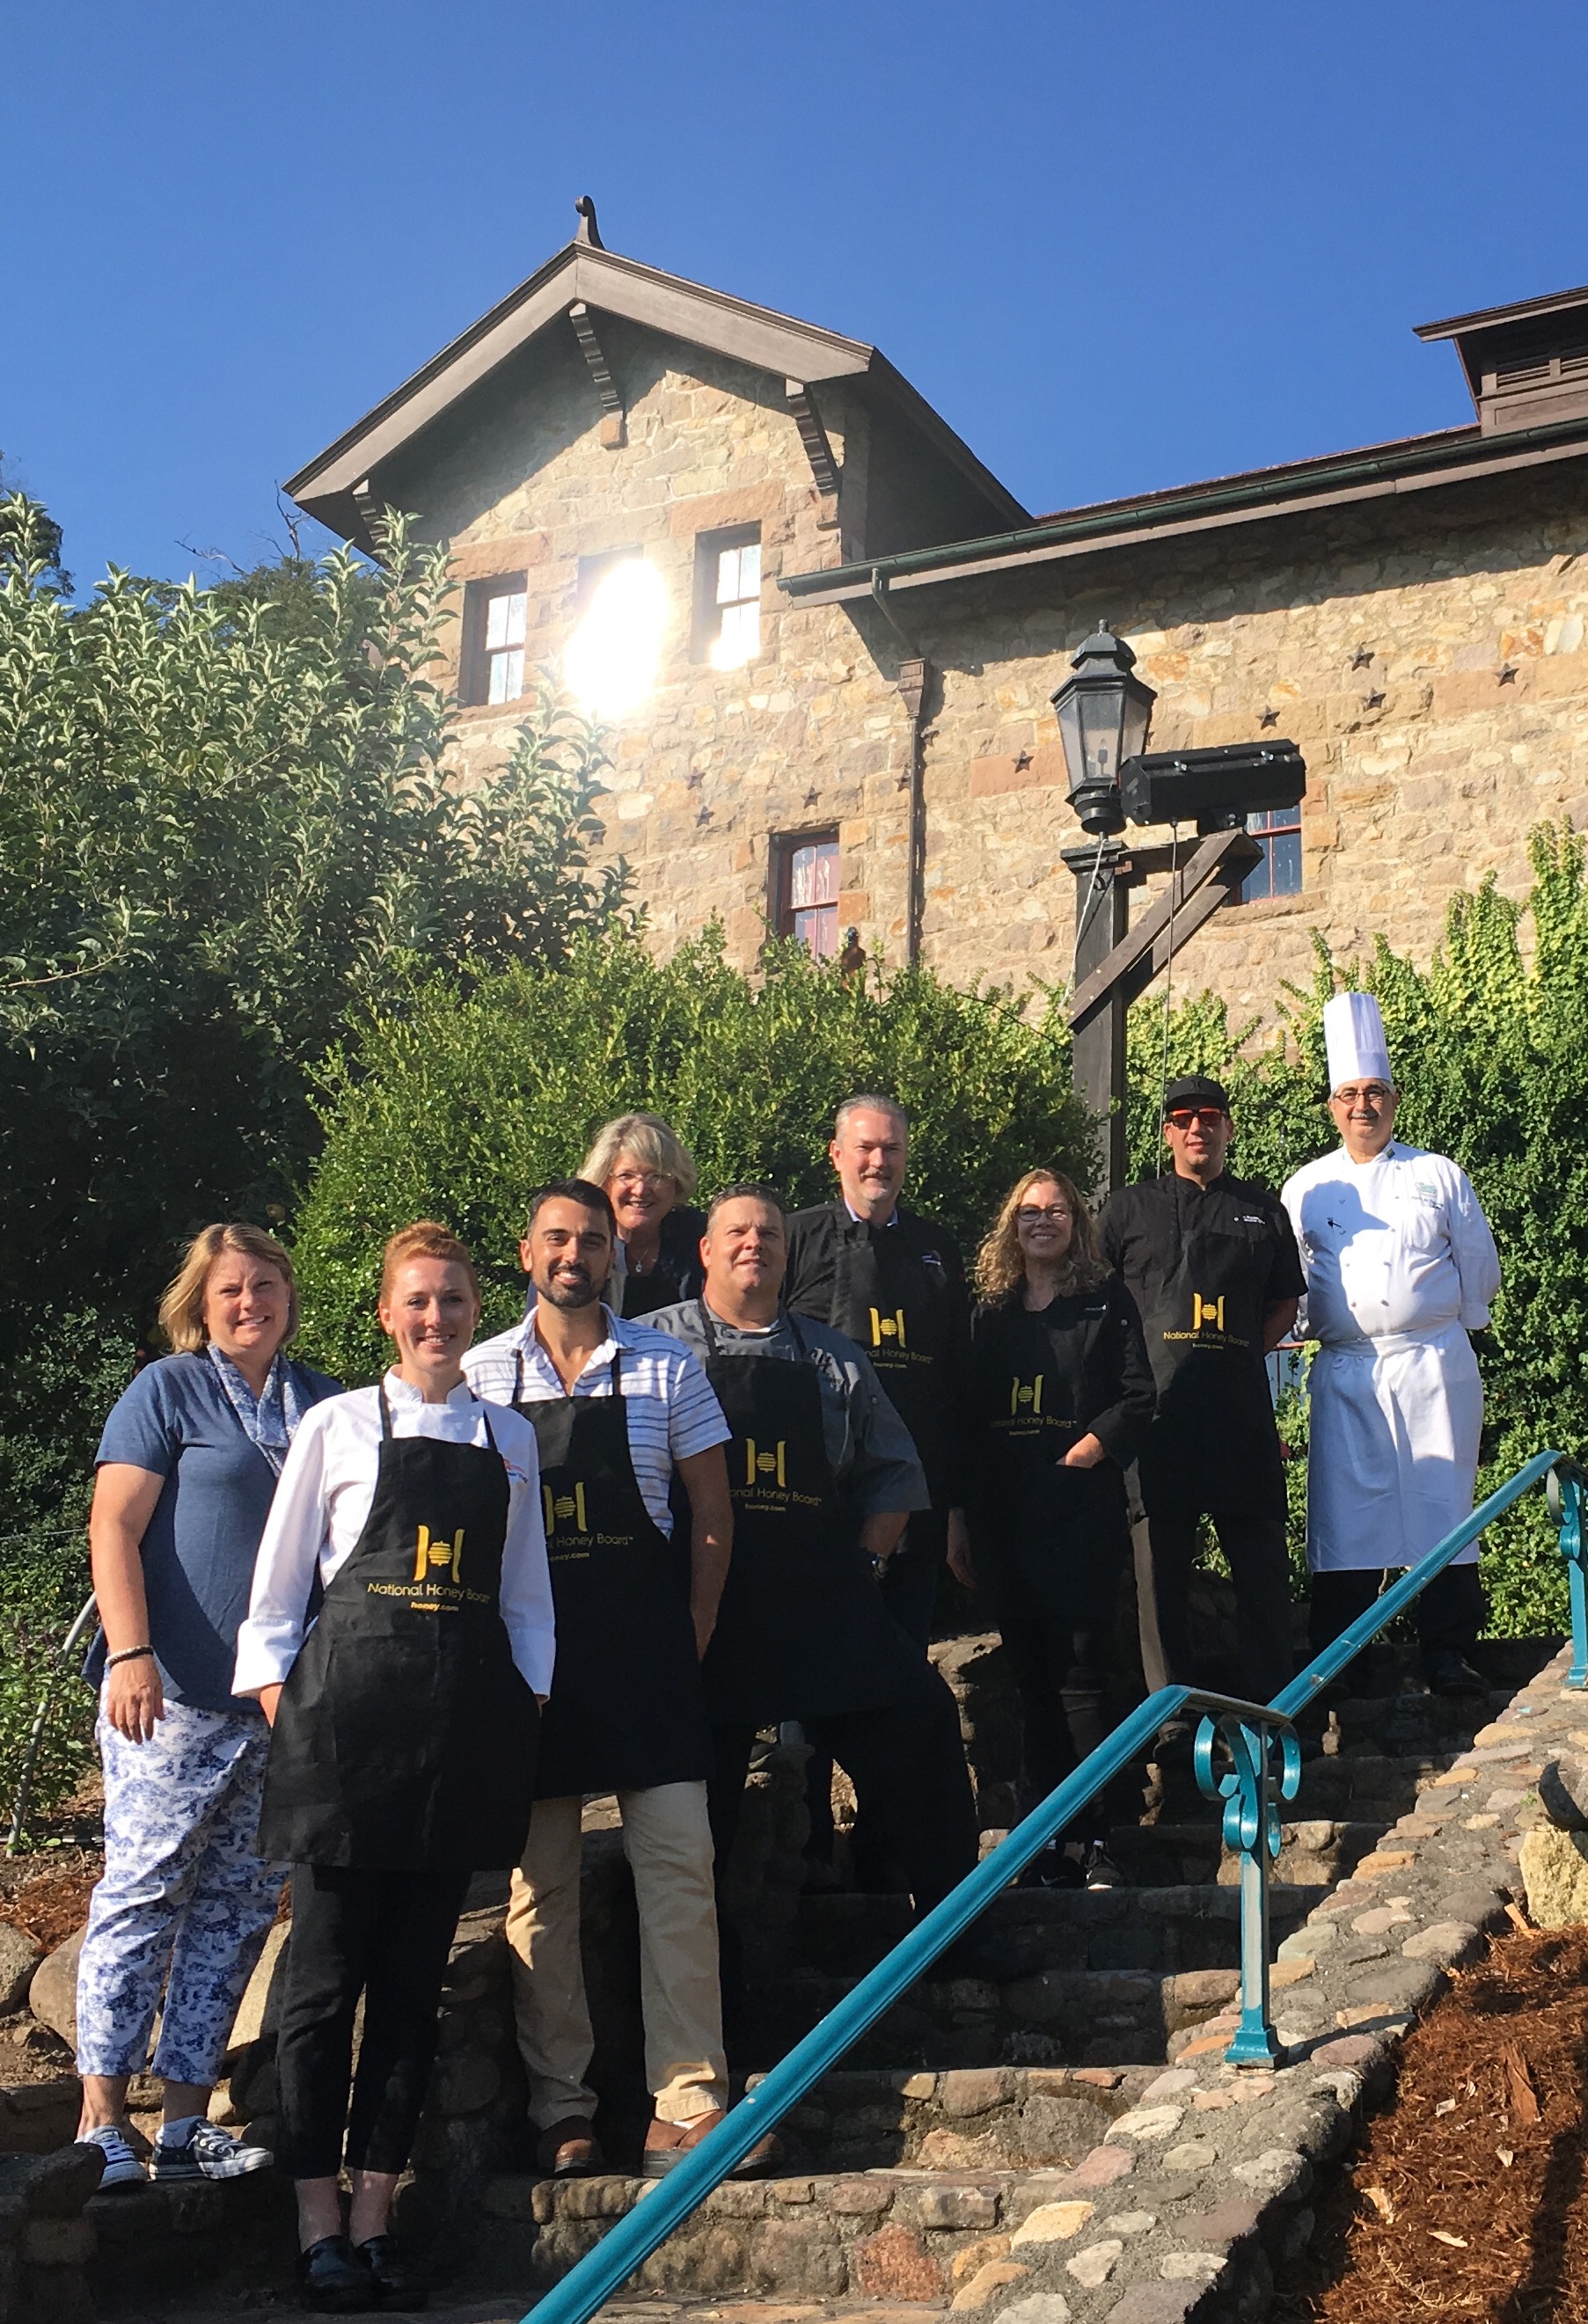 Hosted at the Culinary Institute of America in Napa Valley, NHB’s 2017 Honey Summit delivered sweet inspiration to top-notch food and beverage pros from across the country.